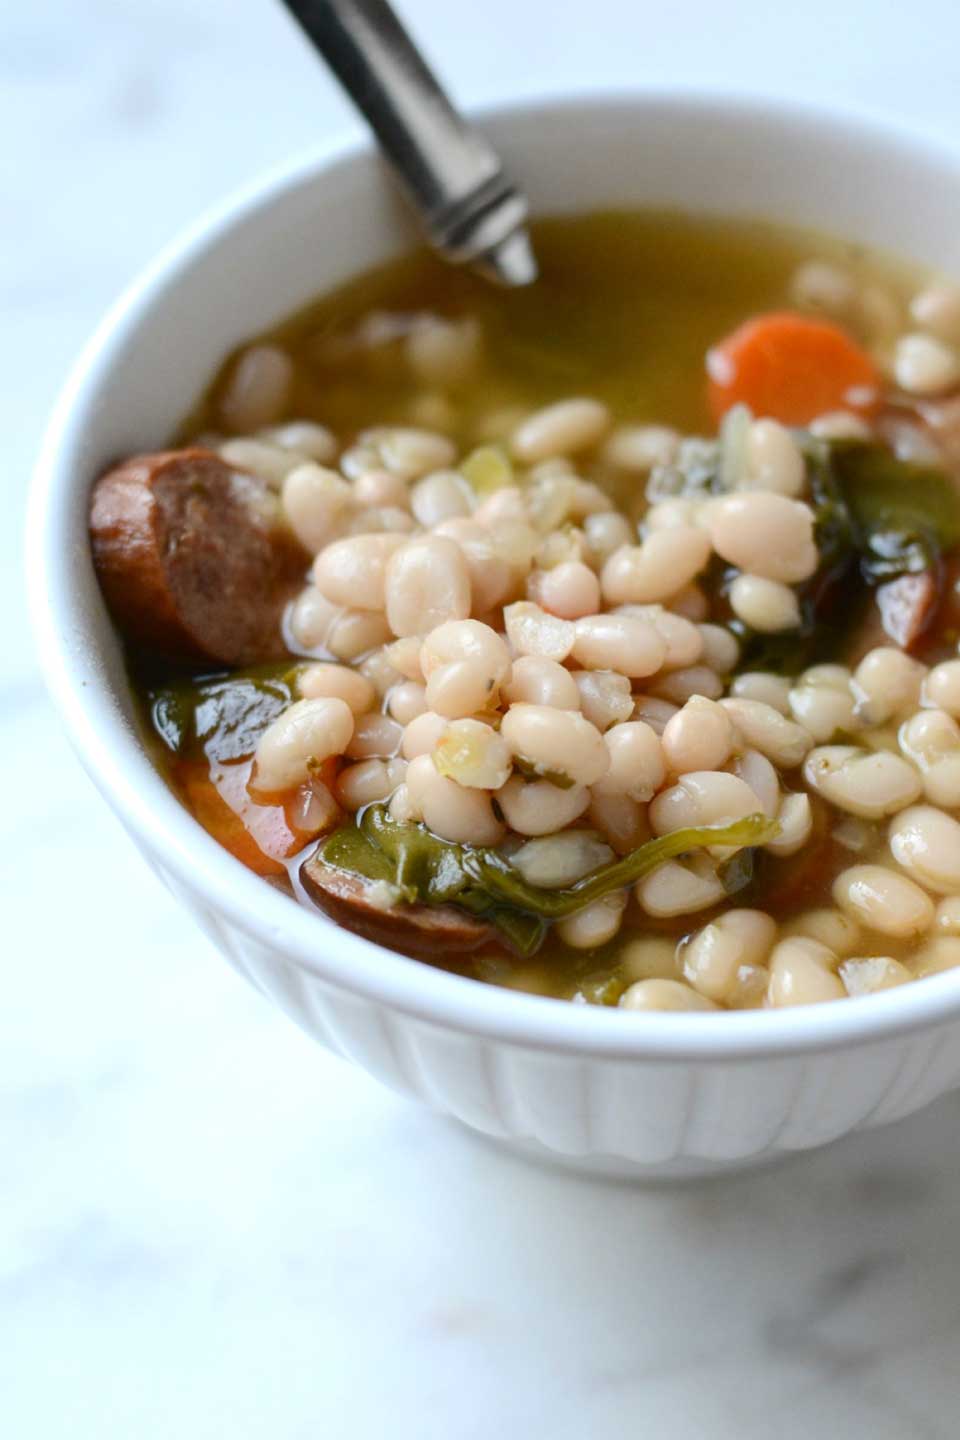 Instant Pot Soup with Smoked Sausage, White Beans & Vegetables from Alyssa at Good + Simple is just one of the quick and delicious Instant Pot soup recipes we’ve got line up for you – be sure to check them all out!